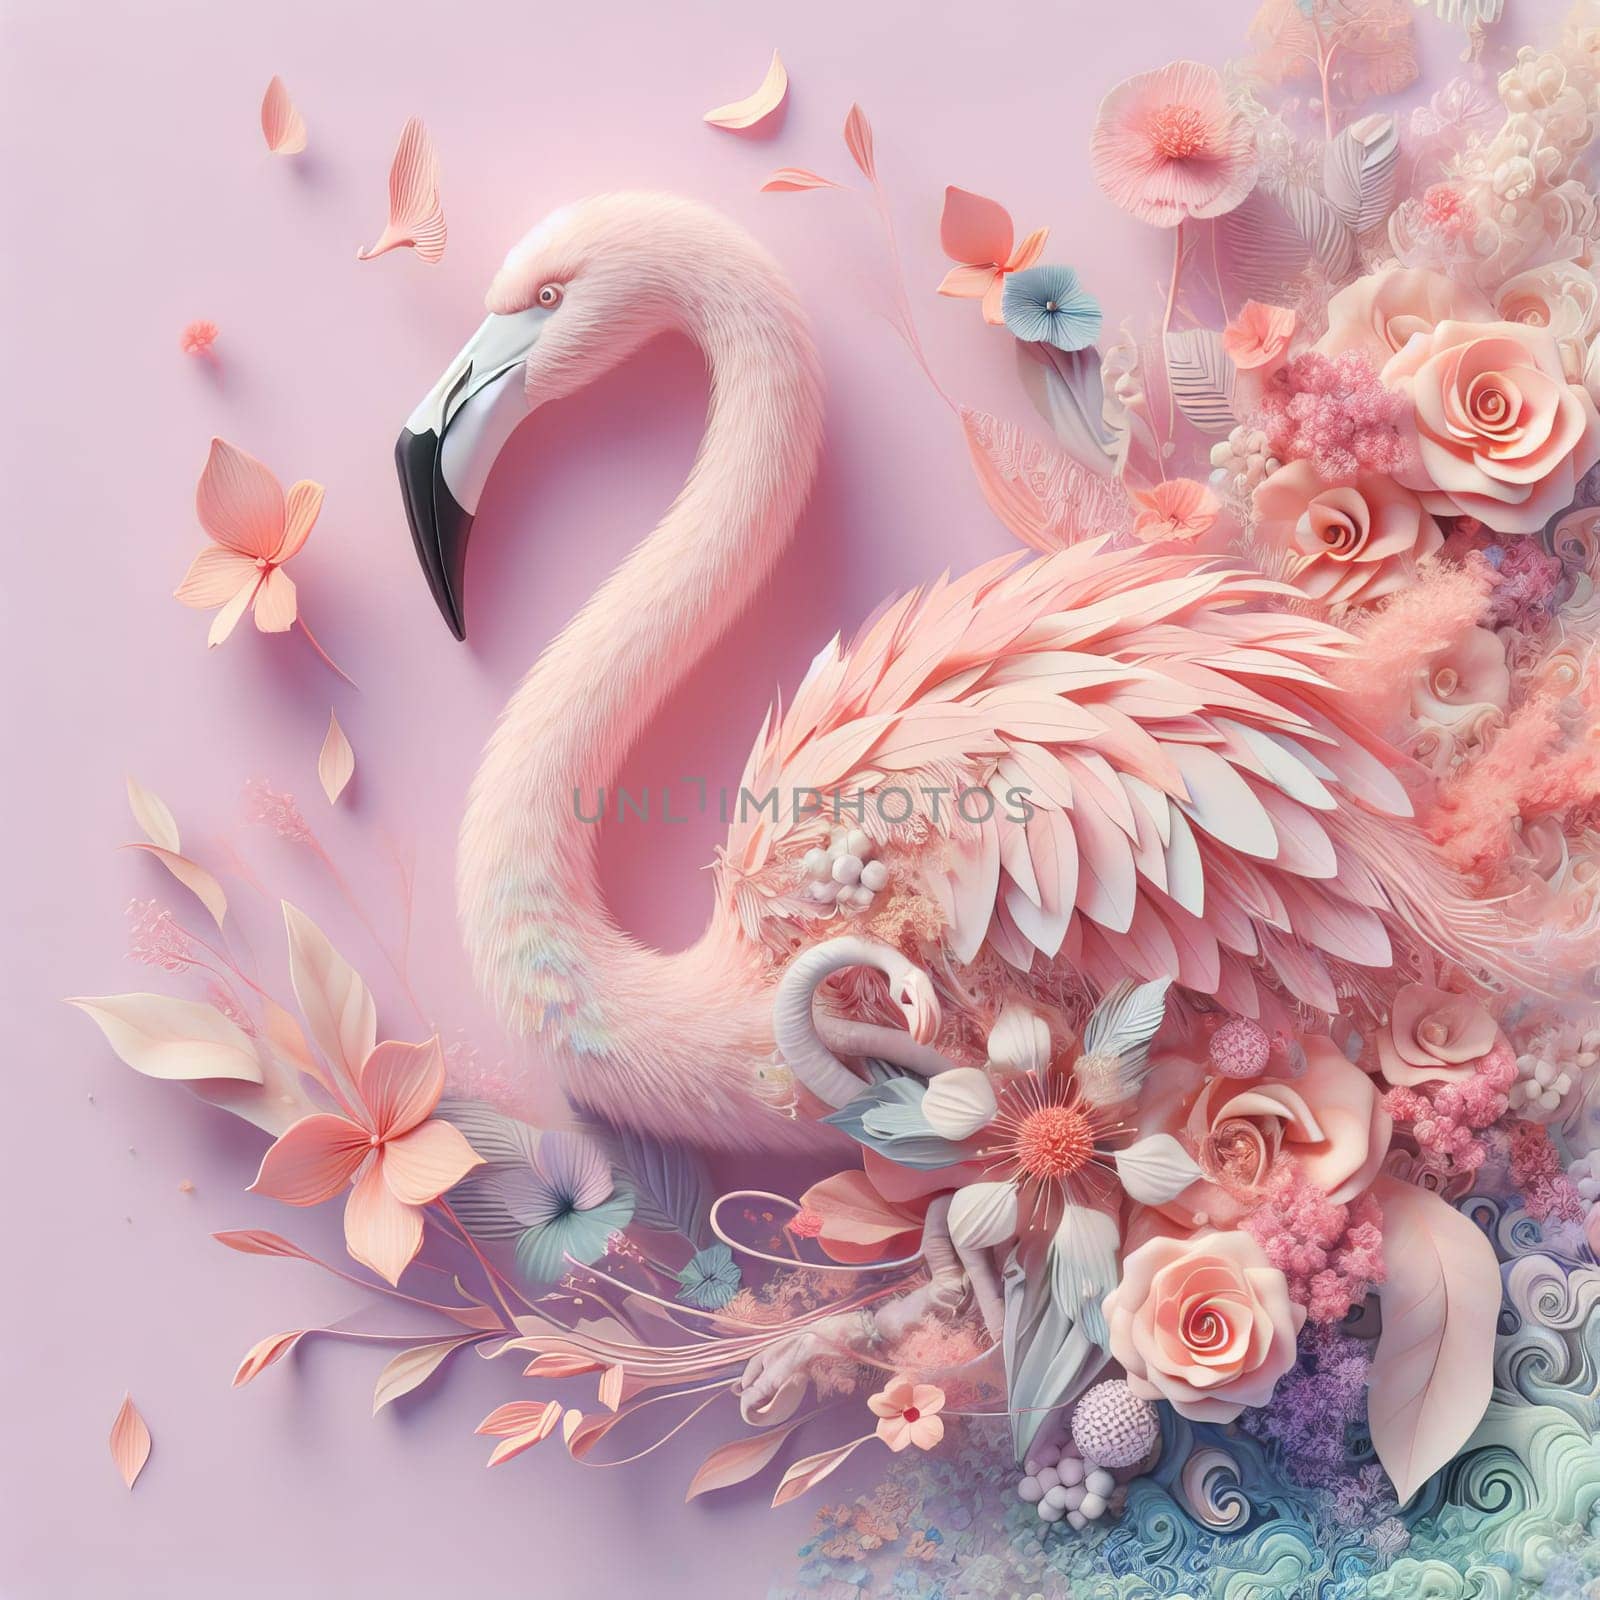 Image of a flamingo in surrealism style with flowers, pastel colors.